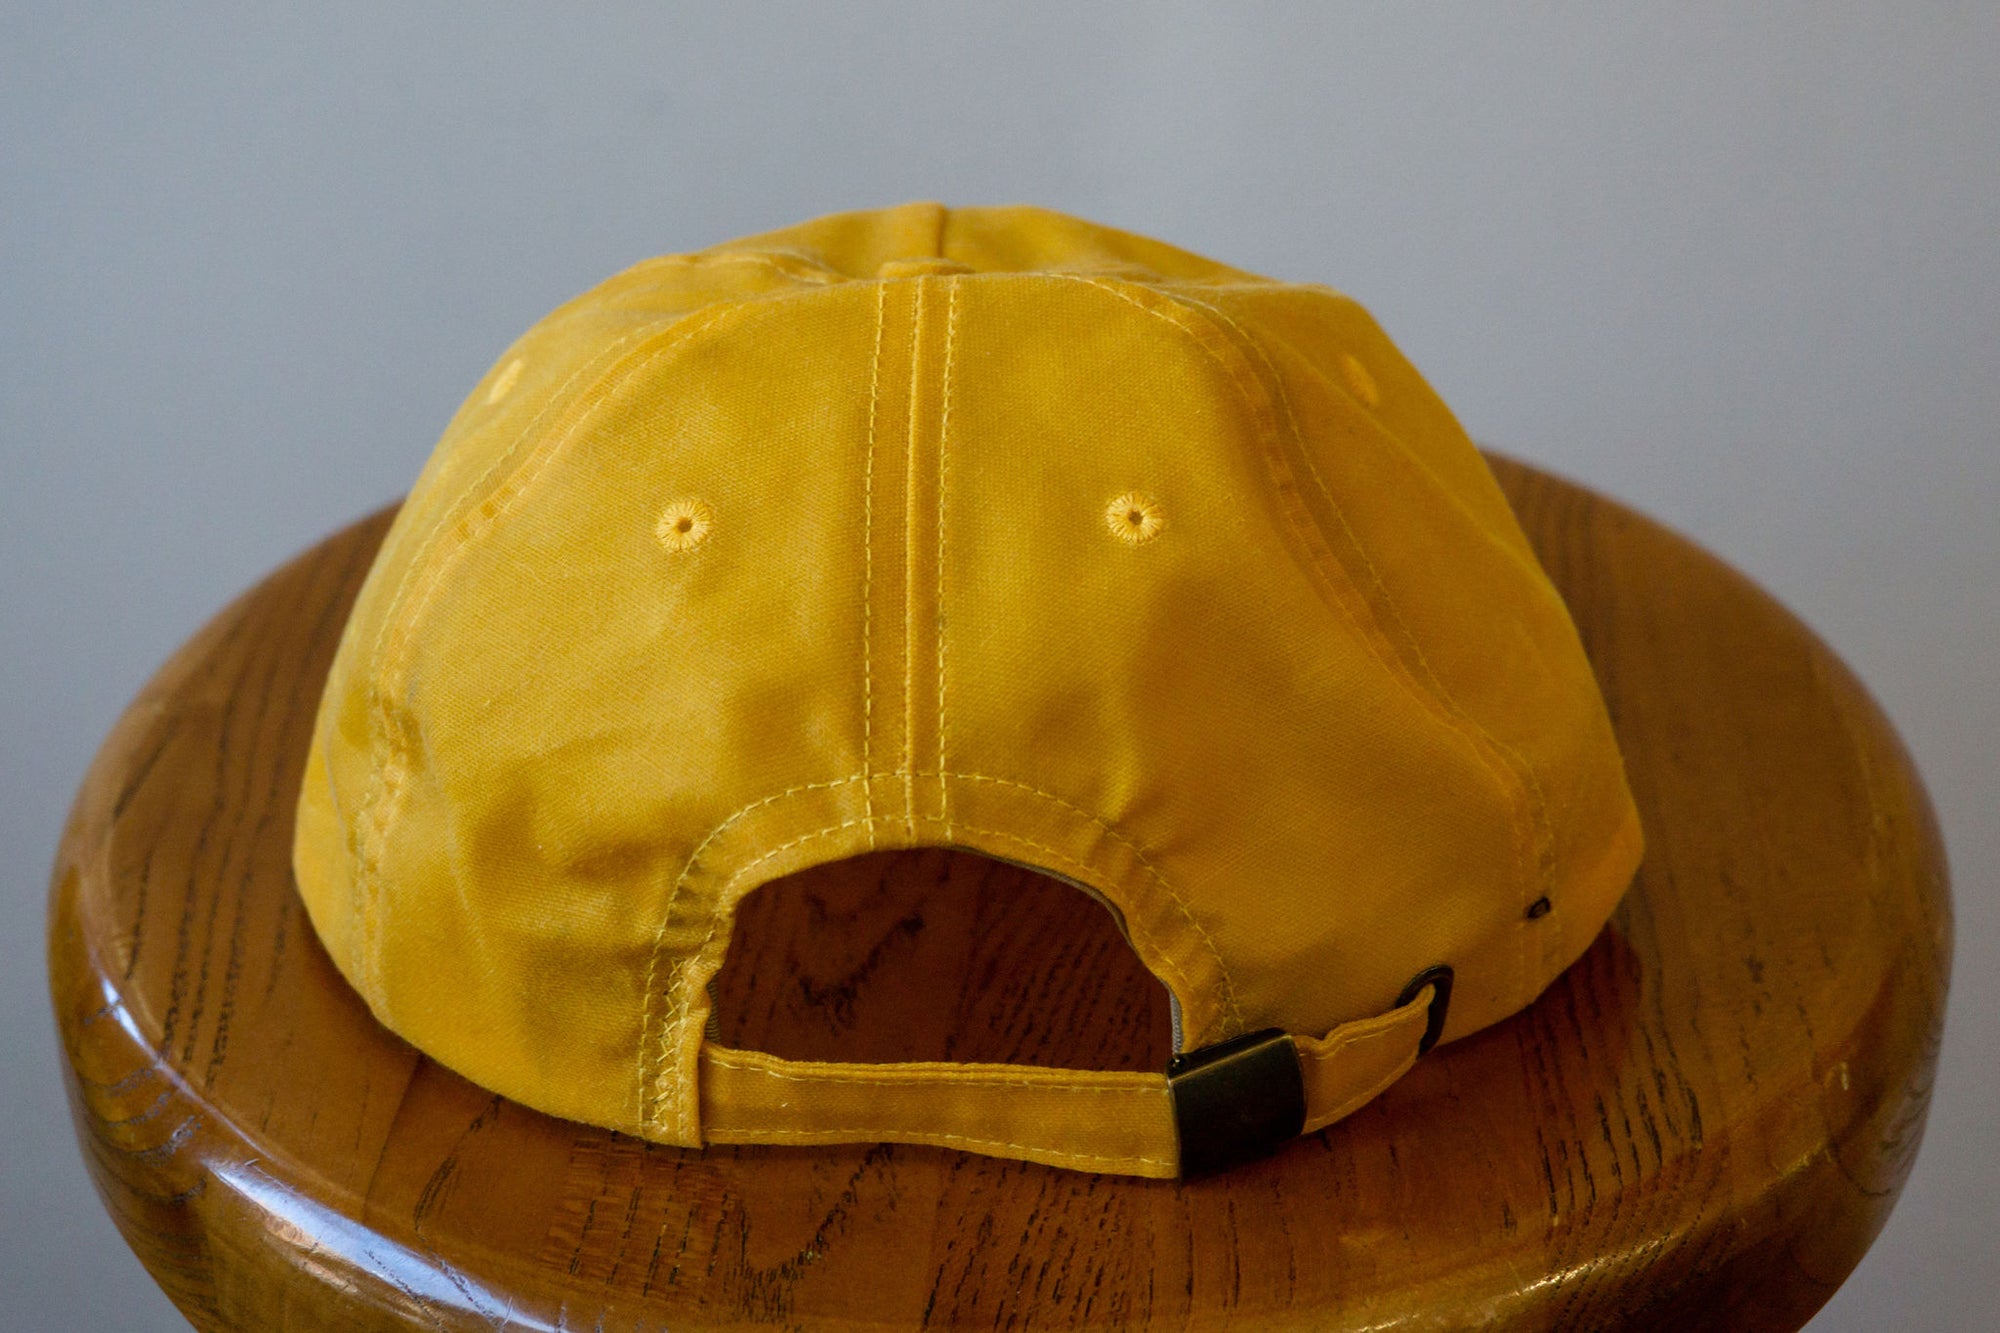 frankford yellow jackets hat